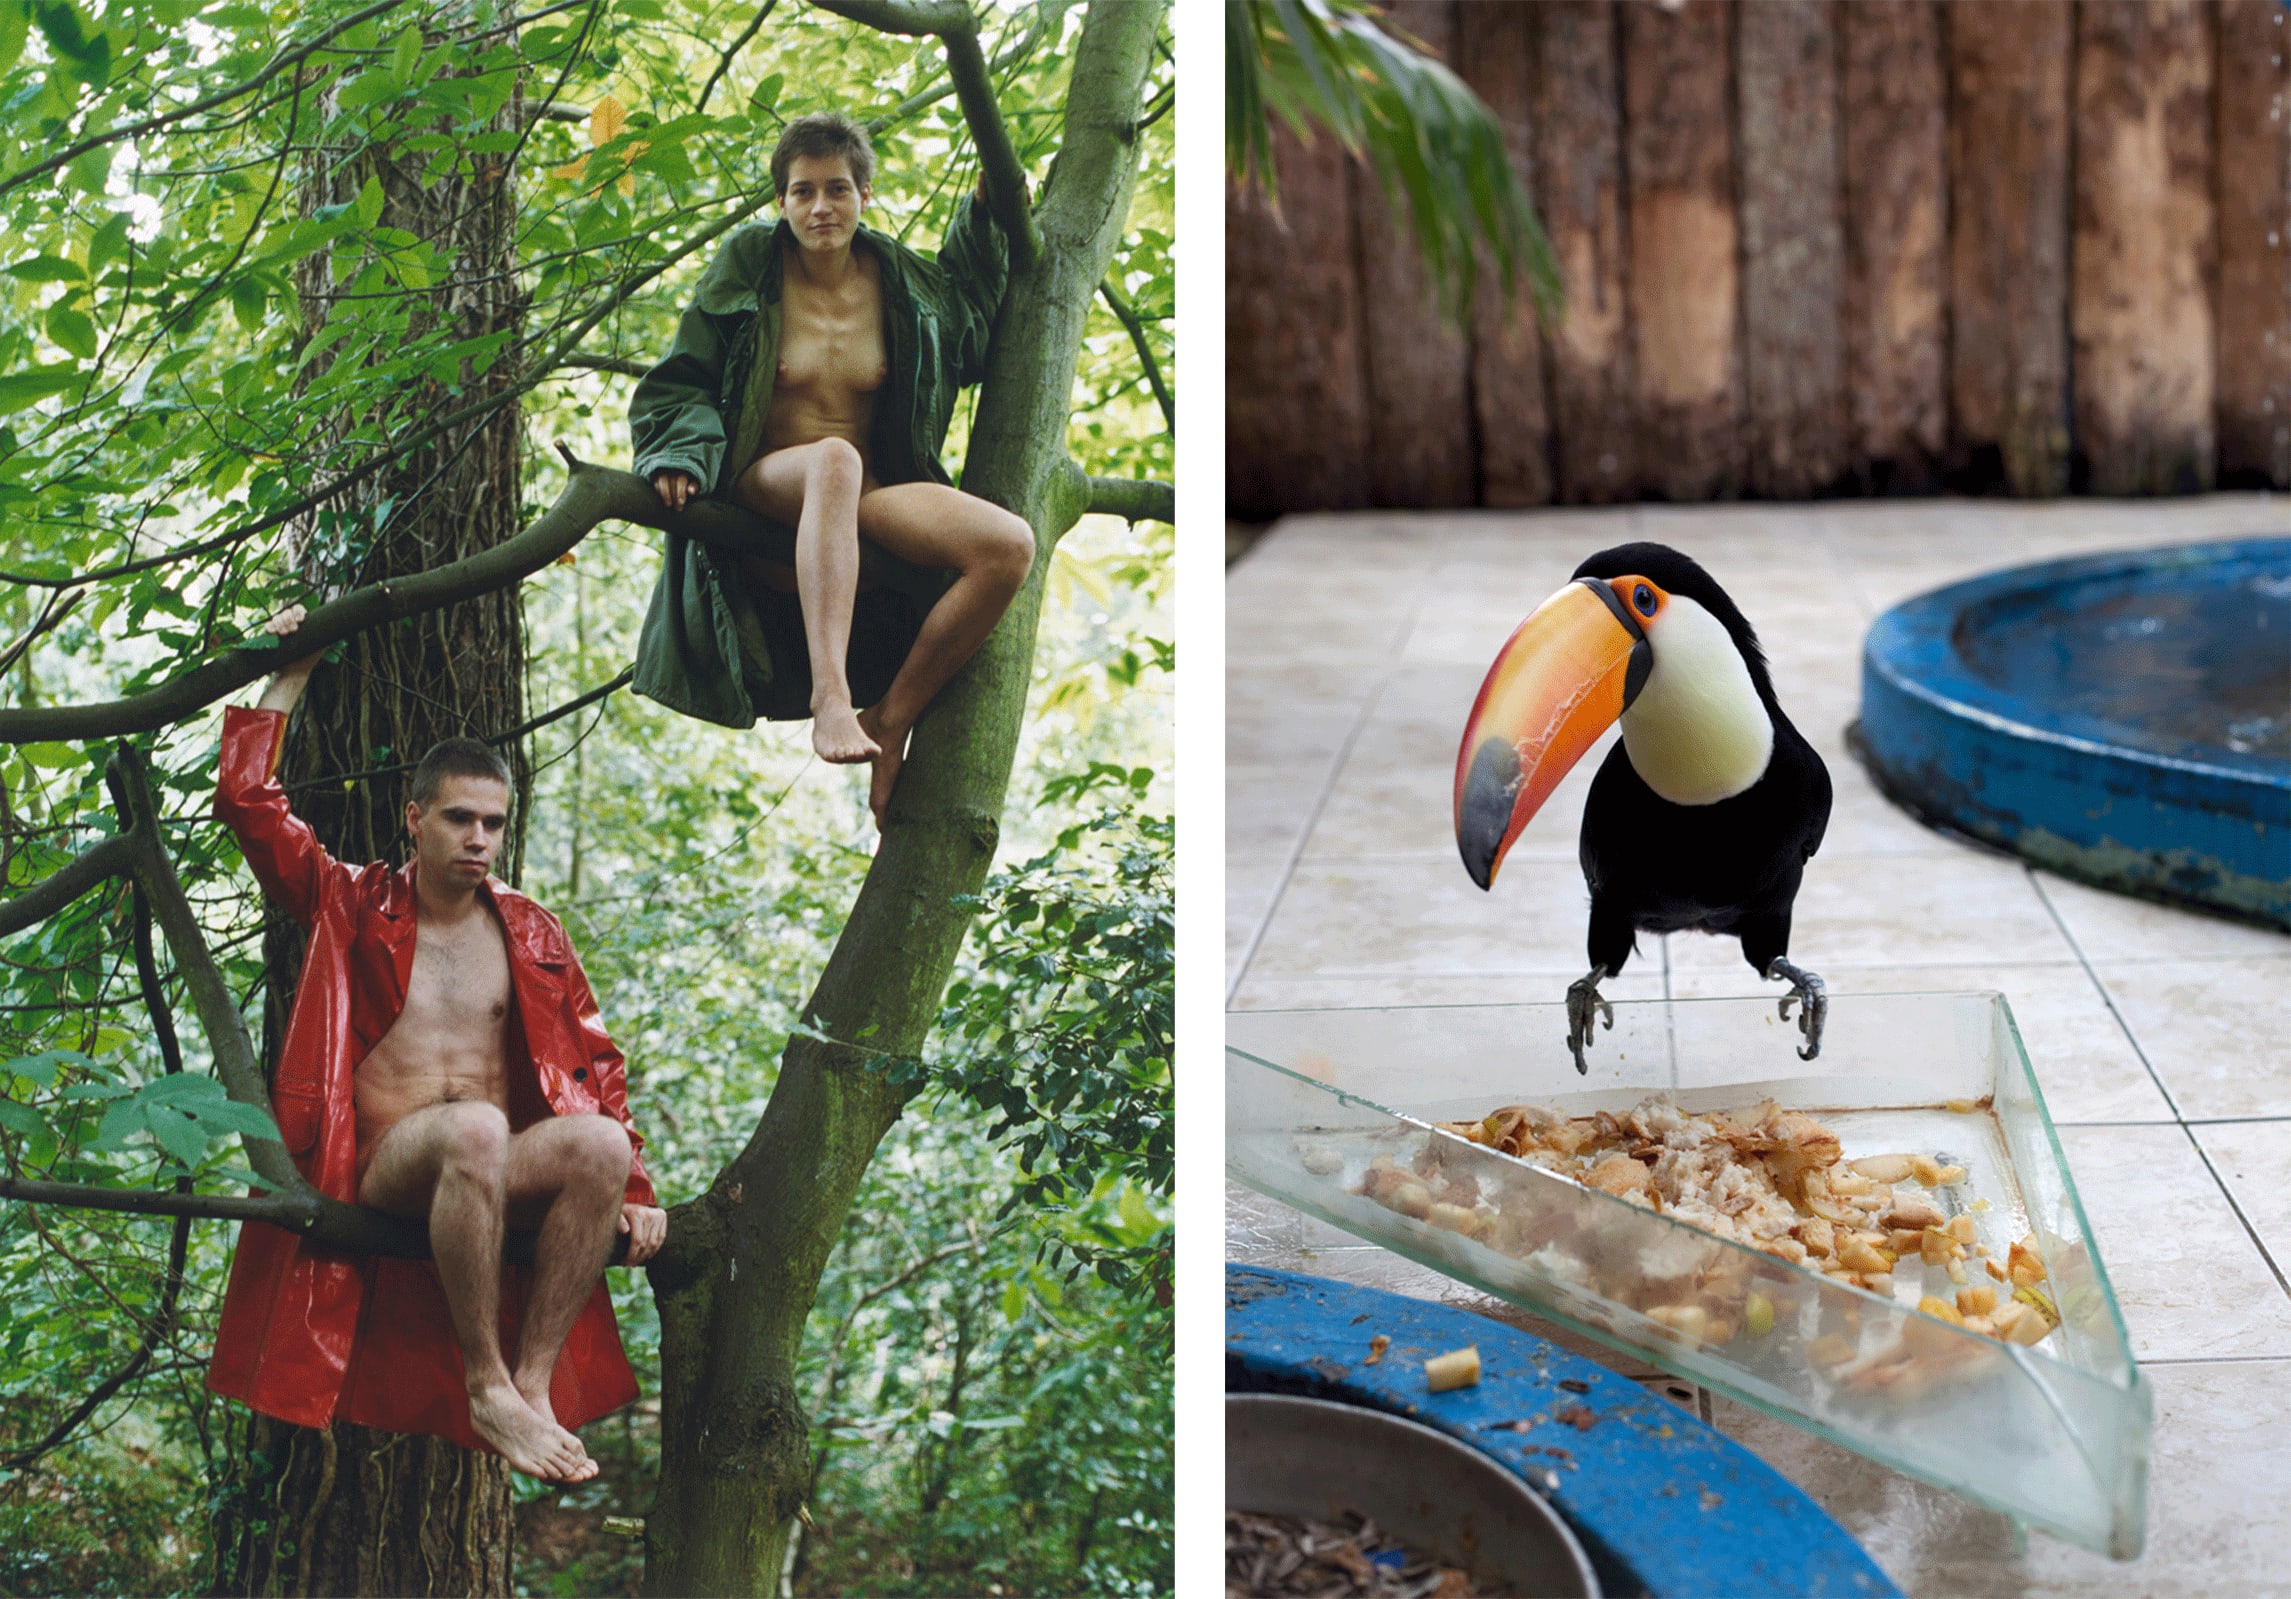 Photos by Wolfgang Tillmans, courtesy of the artist and David Zwirner, New York and Hong Kong, Galerie Buchholz, Berlin and Cologne, Maureen Paley, London: Left: Lutz & Alex sitting in the trees (1992). Right: Tukan (Toucan, 2010). 